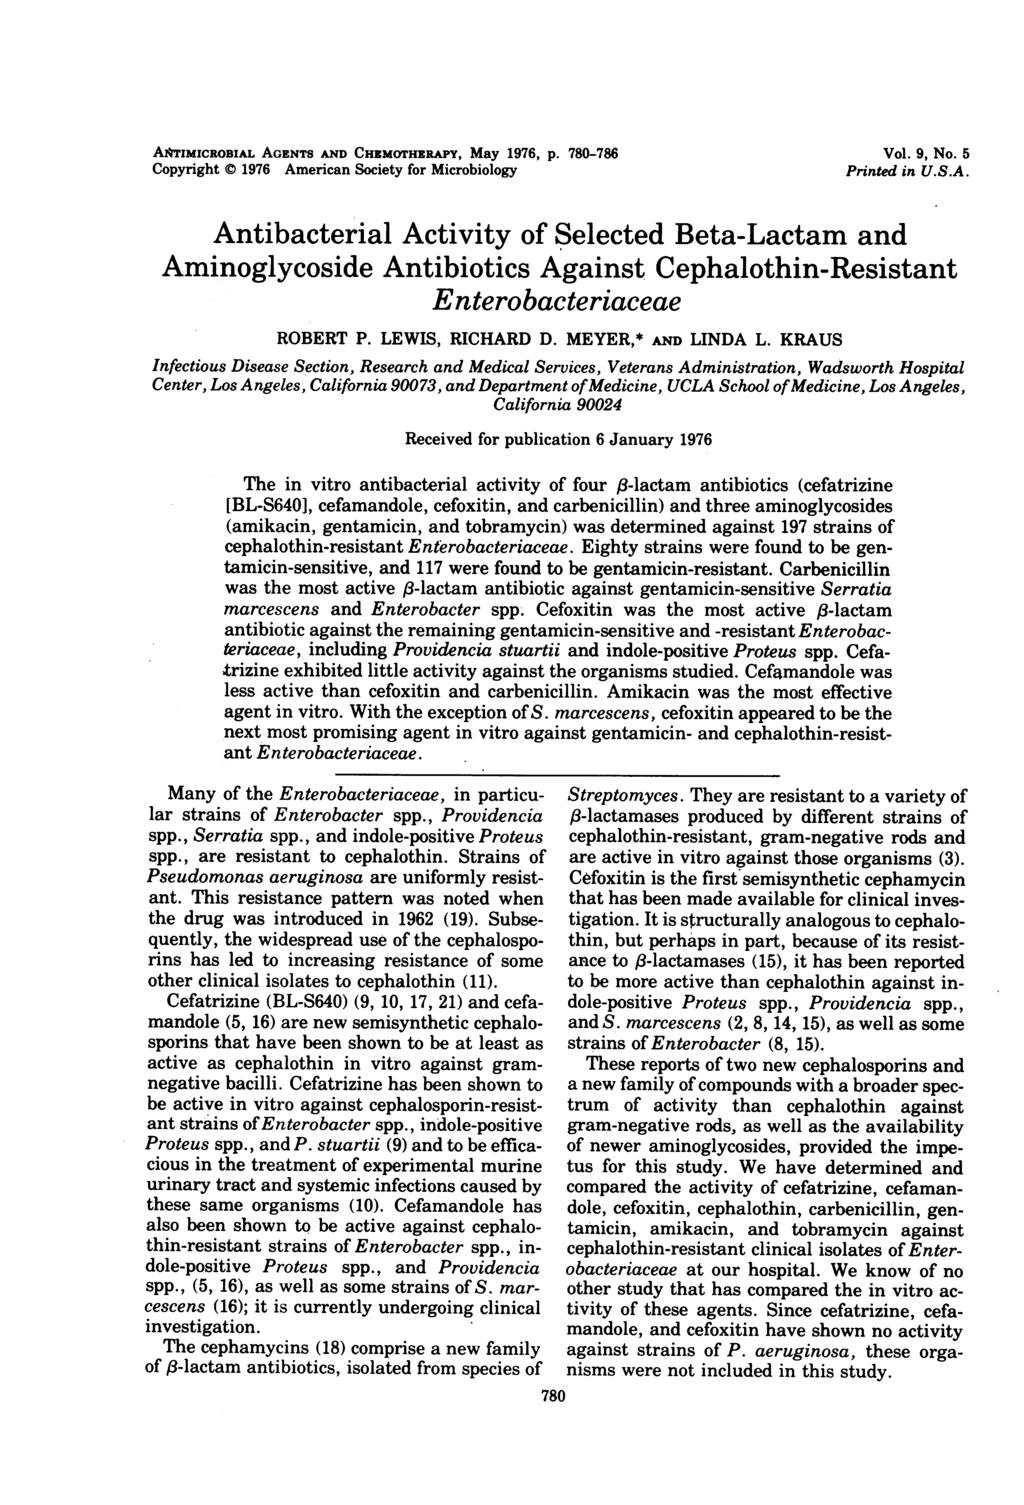 A?TMCROBAL AGENTS AND CHEMOTHERAPY, May 1976, P. 780-786 Copyright 1976 American Society for Microbiology Vol. 9, No. 5 Printed in U.S.A. Antibacterial Activity of Selected Beta-Lactam and Aminoglycoside Antibiotics Against Cephalothin-Resistant Enterobacteriaceae ROBERT P.